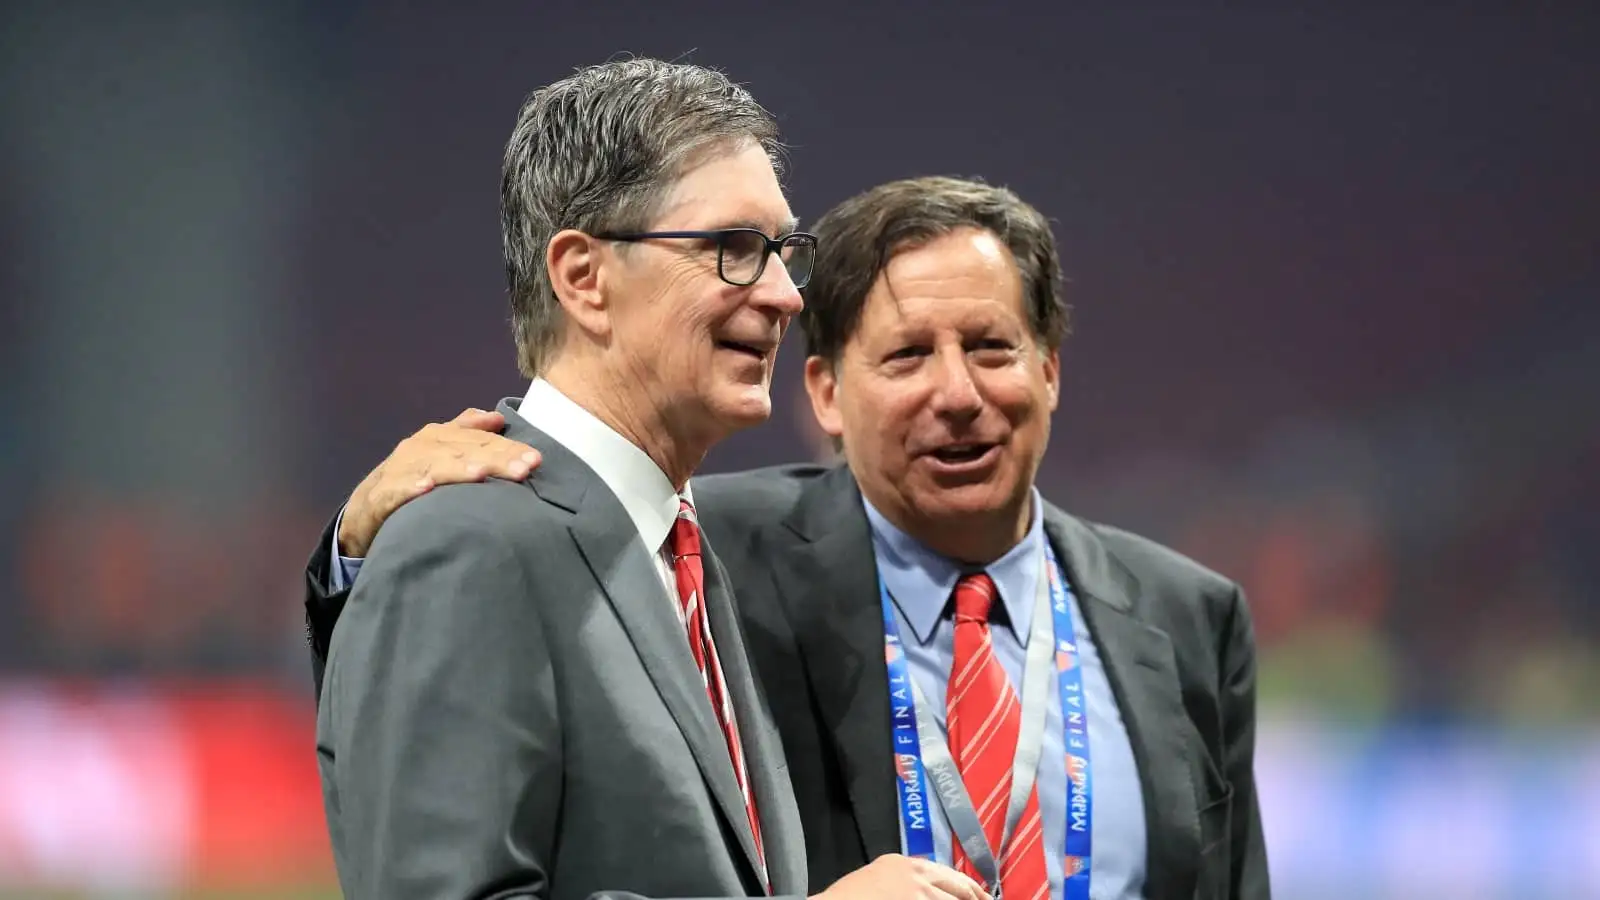 Liverpool takeover: FSG decision to massively effect new transfer policy, though new arrival myth is busted